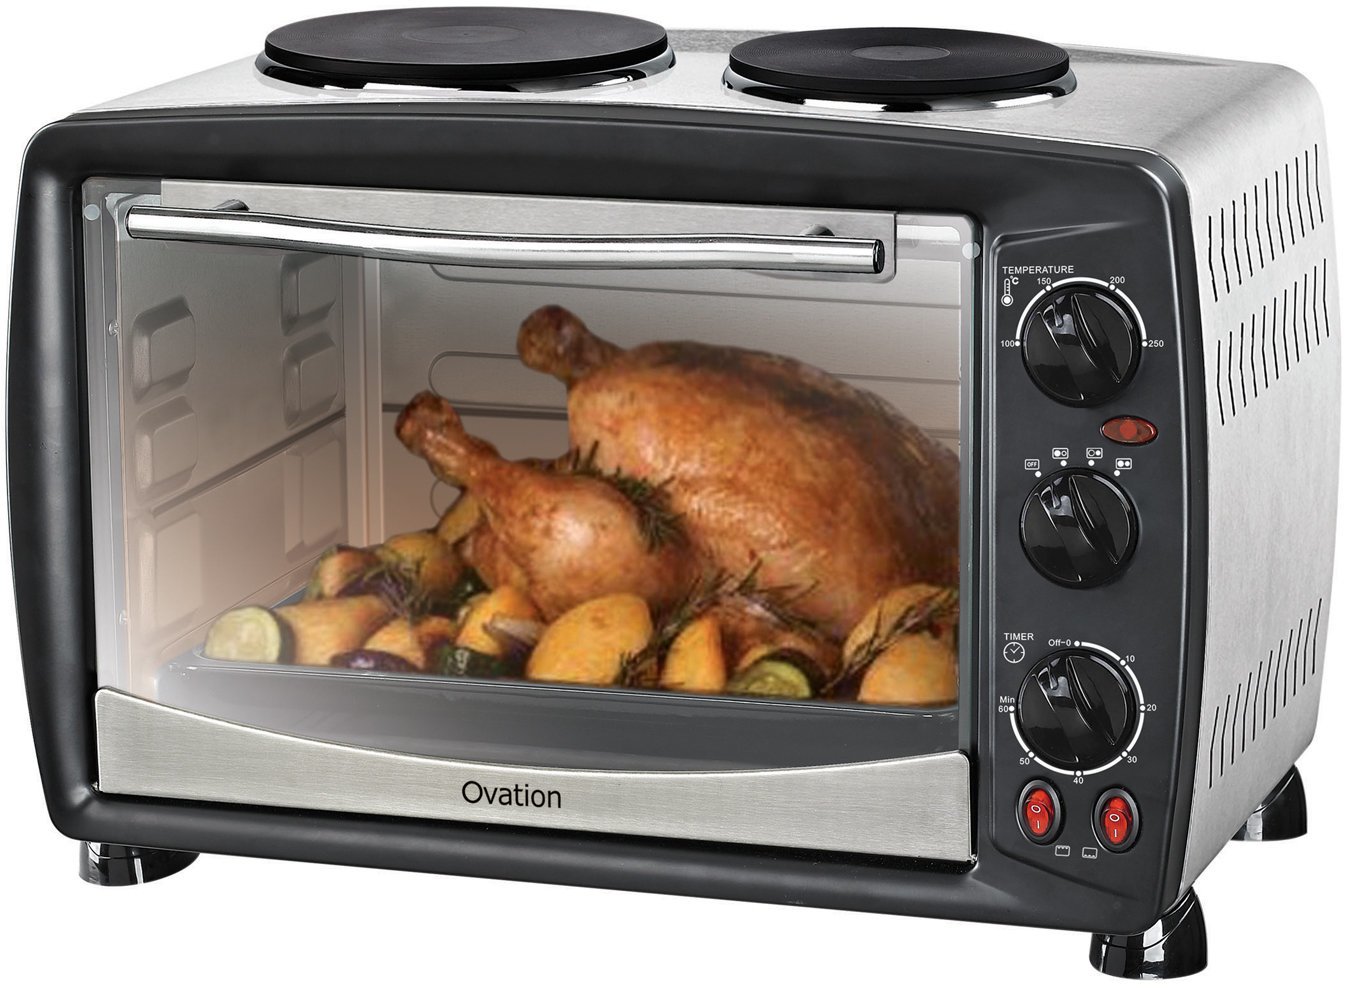 NEW Ovation OV26 26L Microwave with Double Hot Plates 9315240123268 | eBay